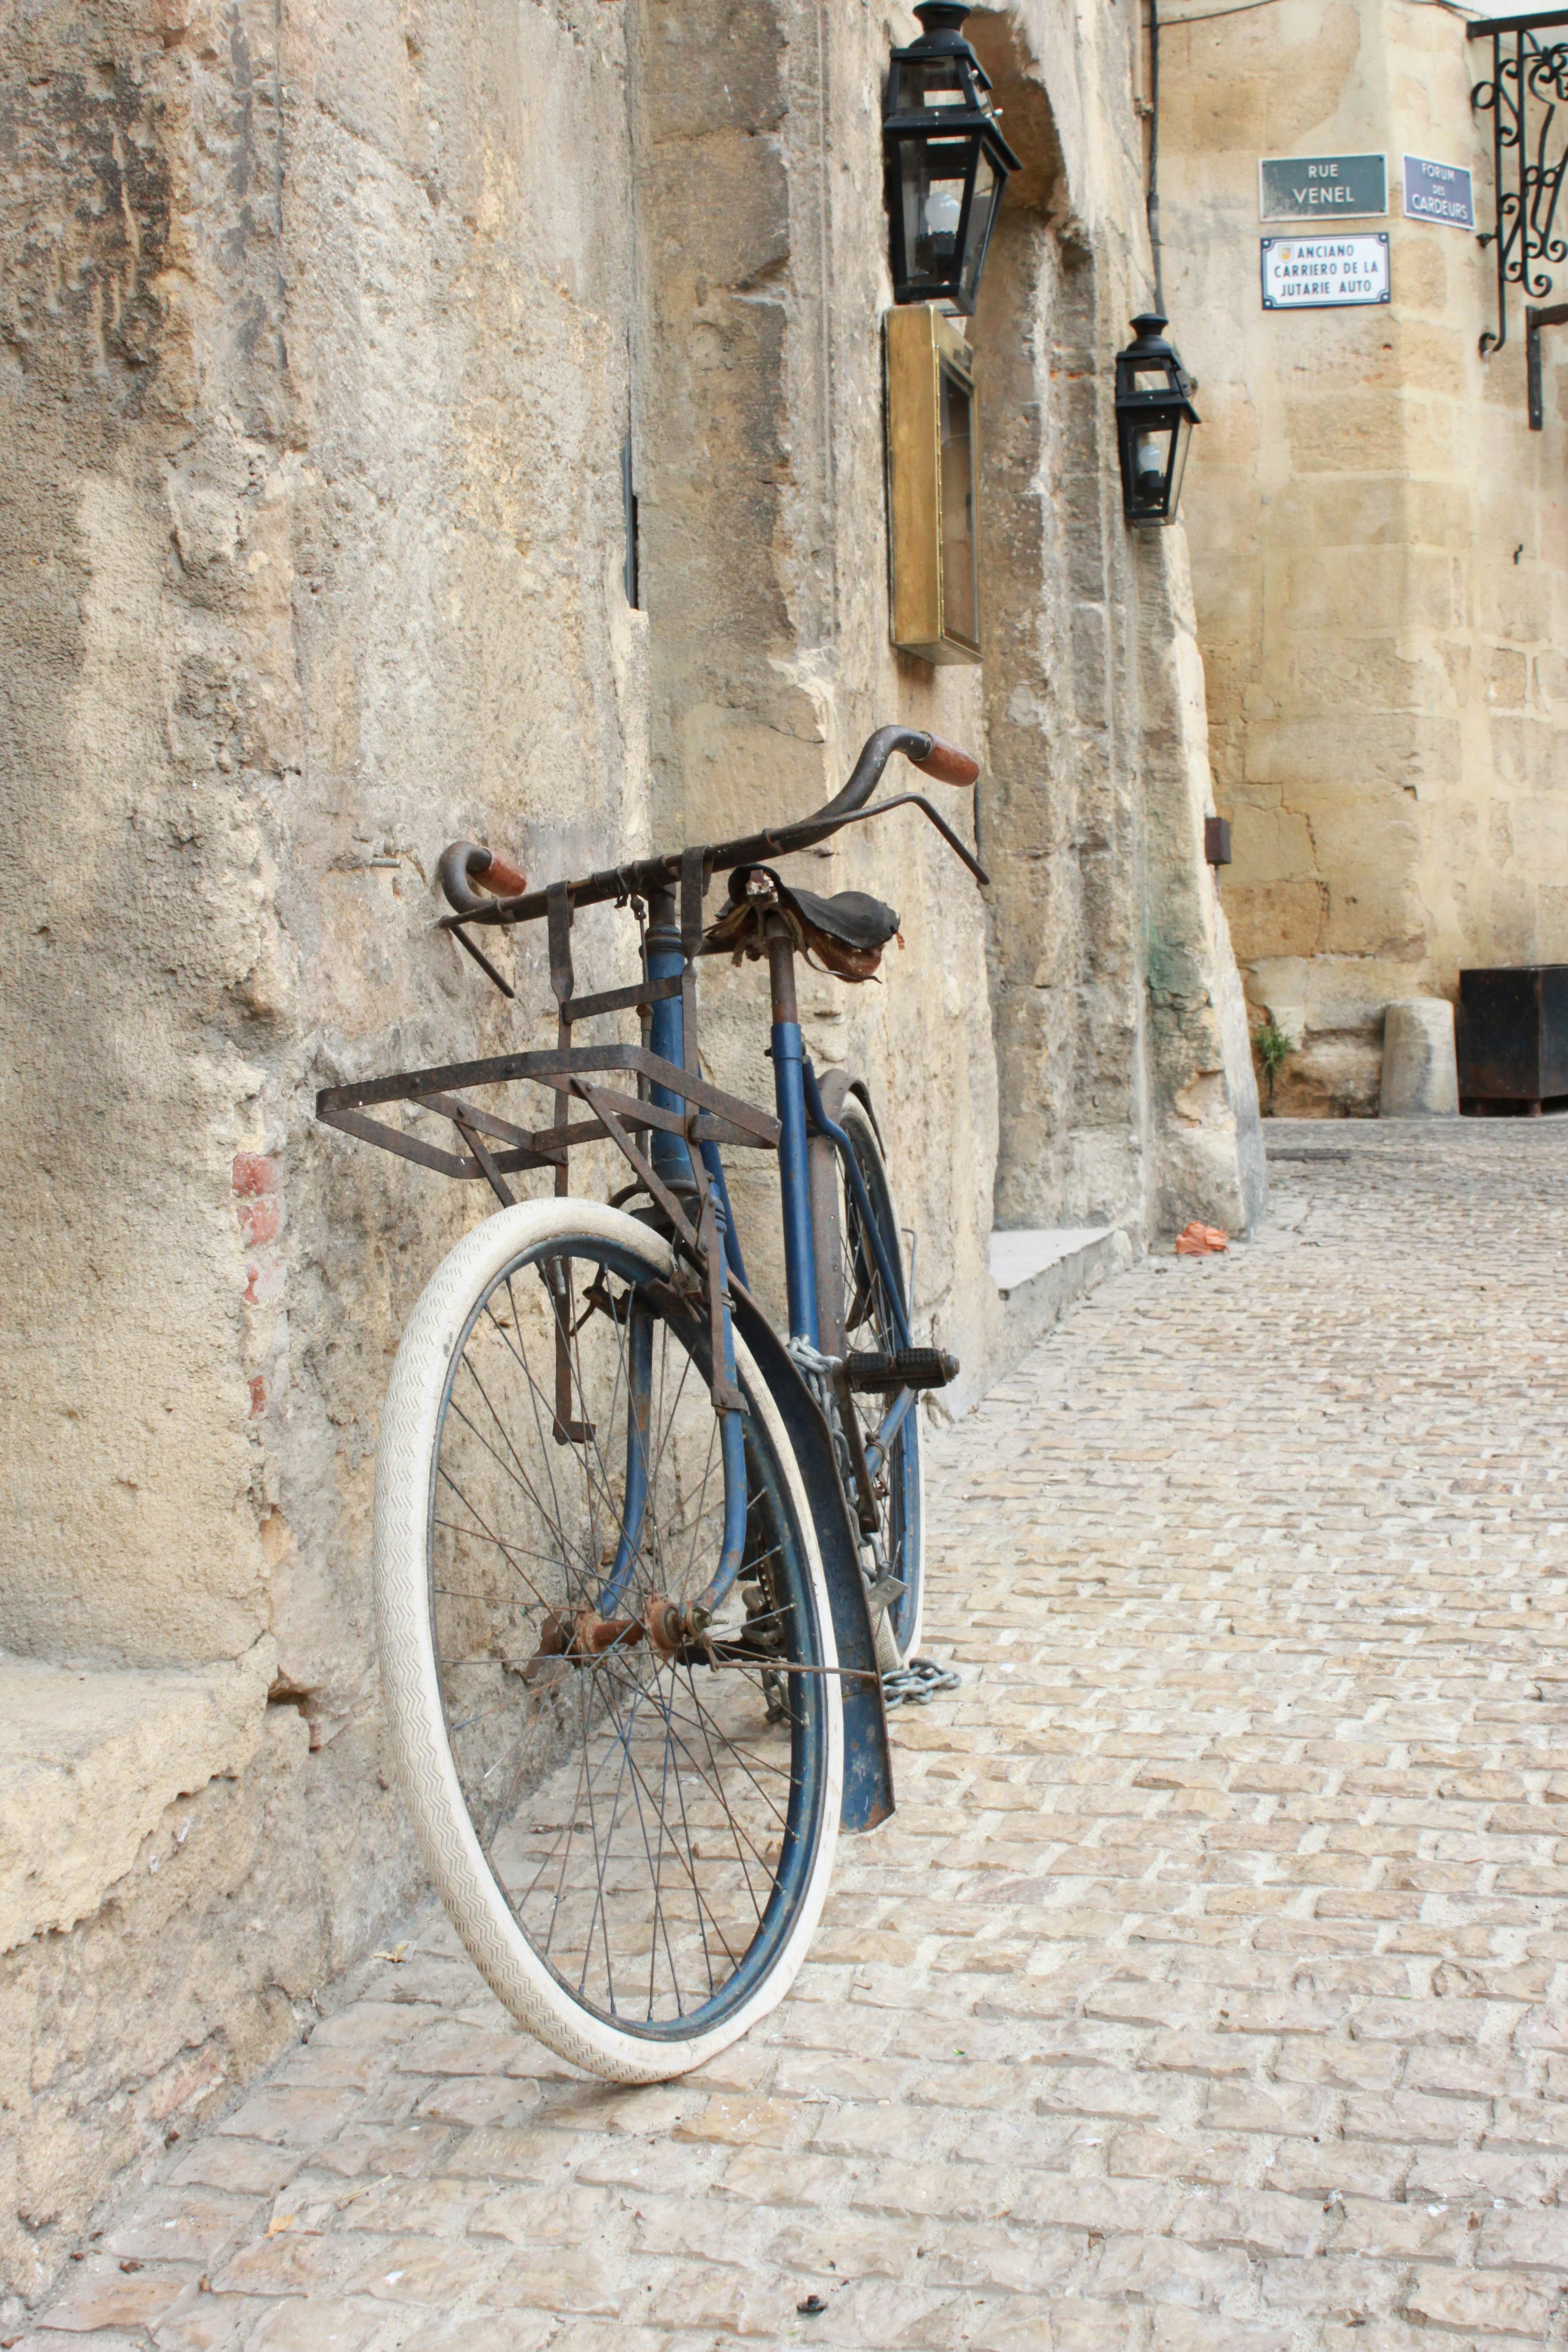 Old bicycle on an old wall in an old town. Captured at 16:15 on September 16th 2009 in Aix-en-Provence, France.